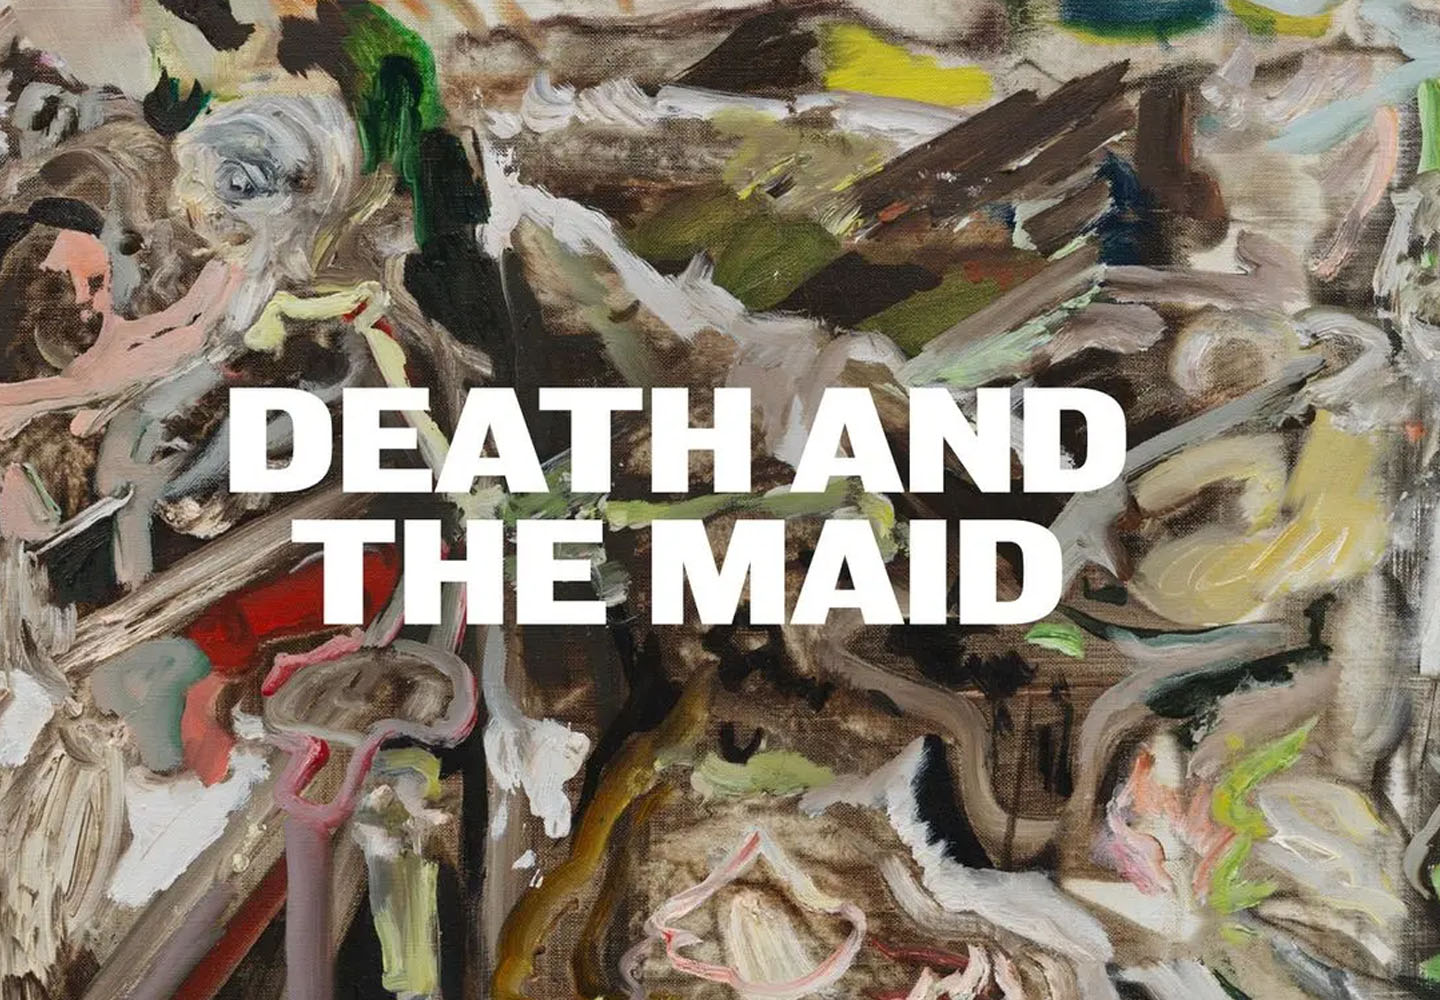 Cecily Brown: Death and the Maid